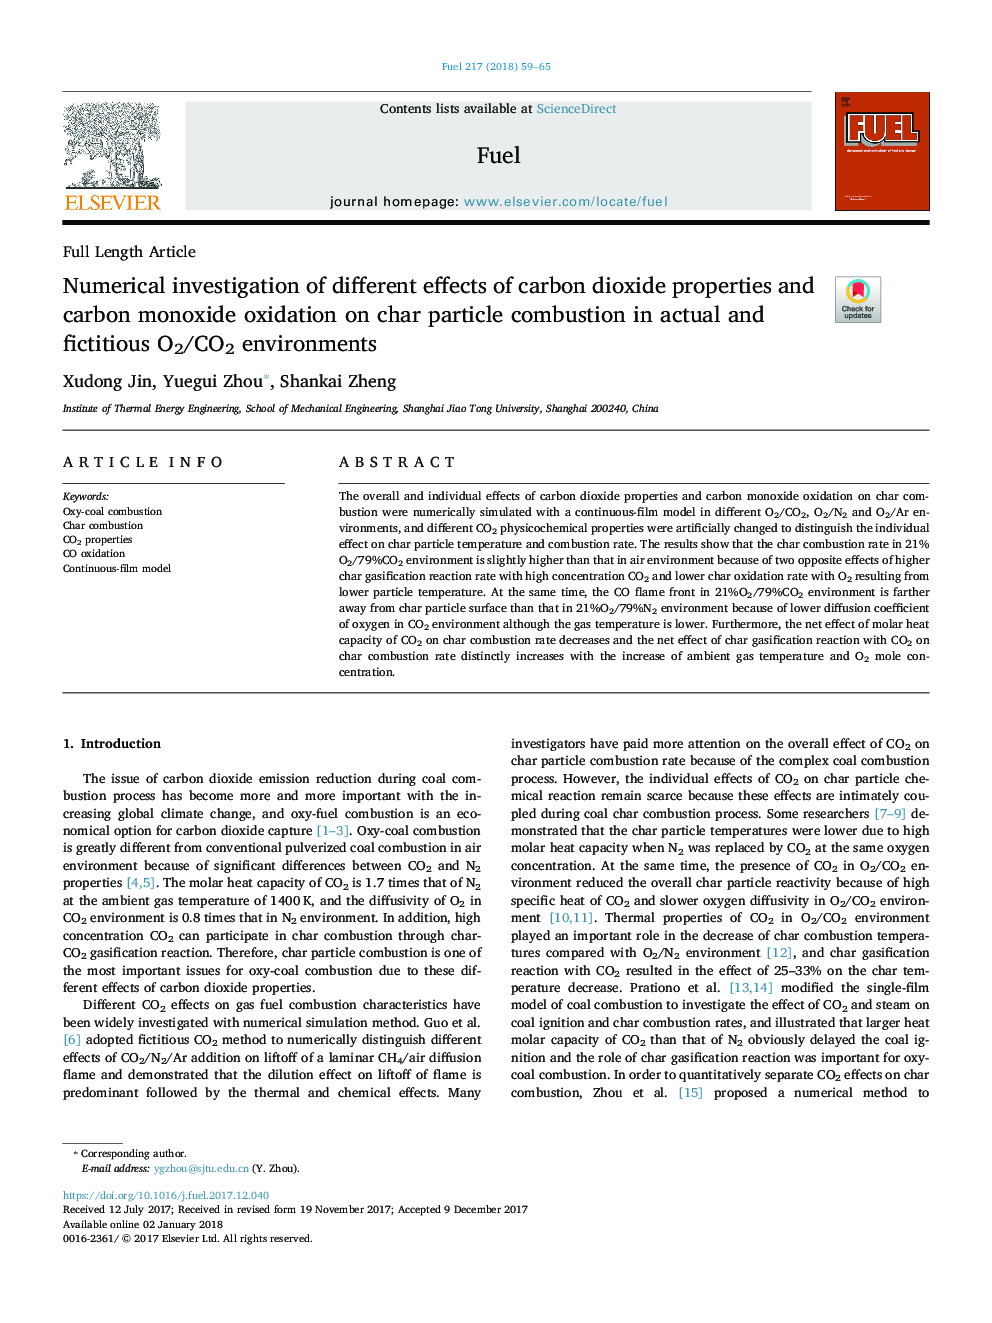 Numerical investigation of different effects of carbon dioxide properties and carbon monoxide oxidation on char particle combustion in actual and fictitious O2/CO2 environments